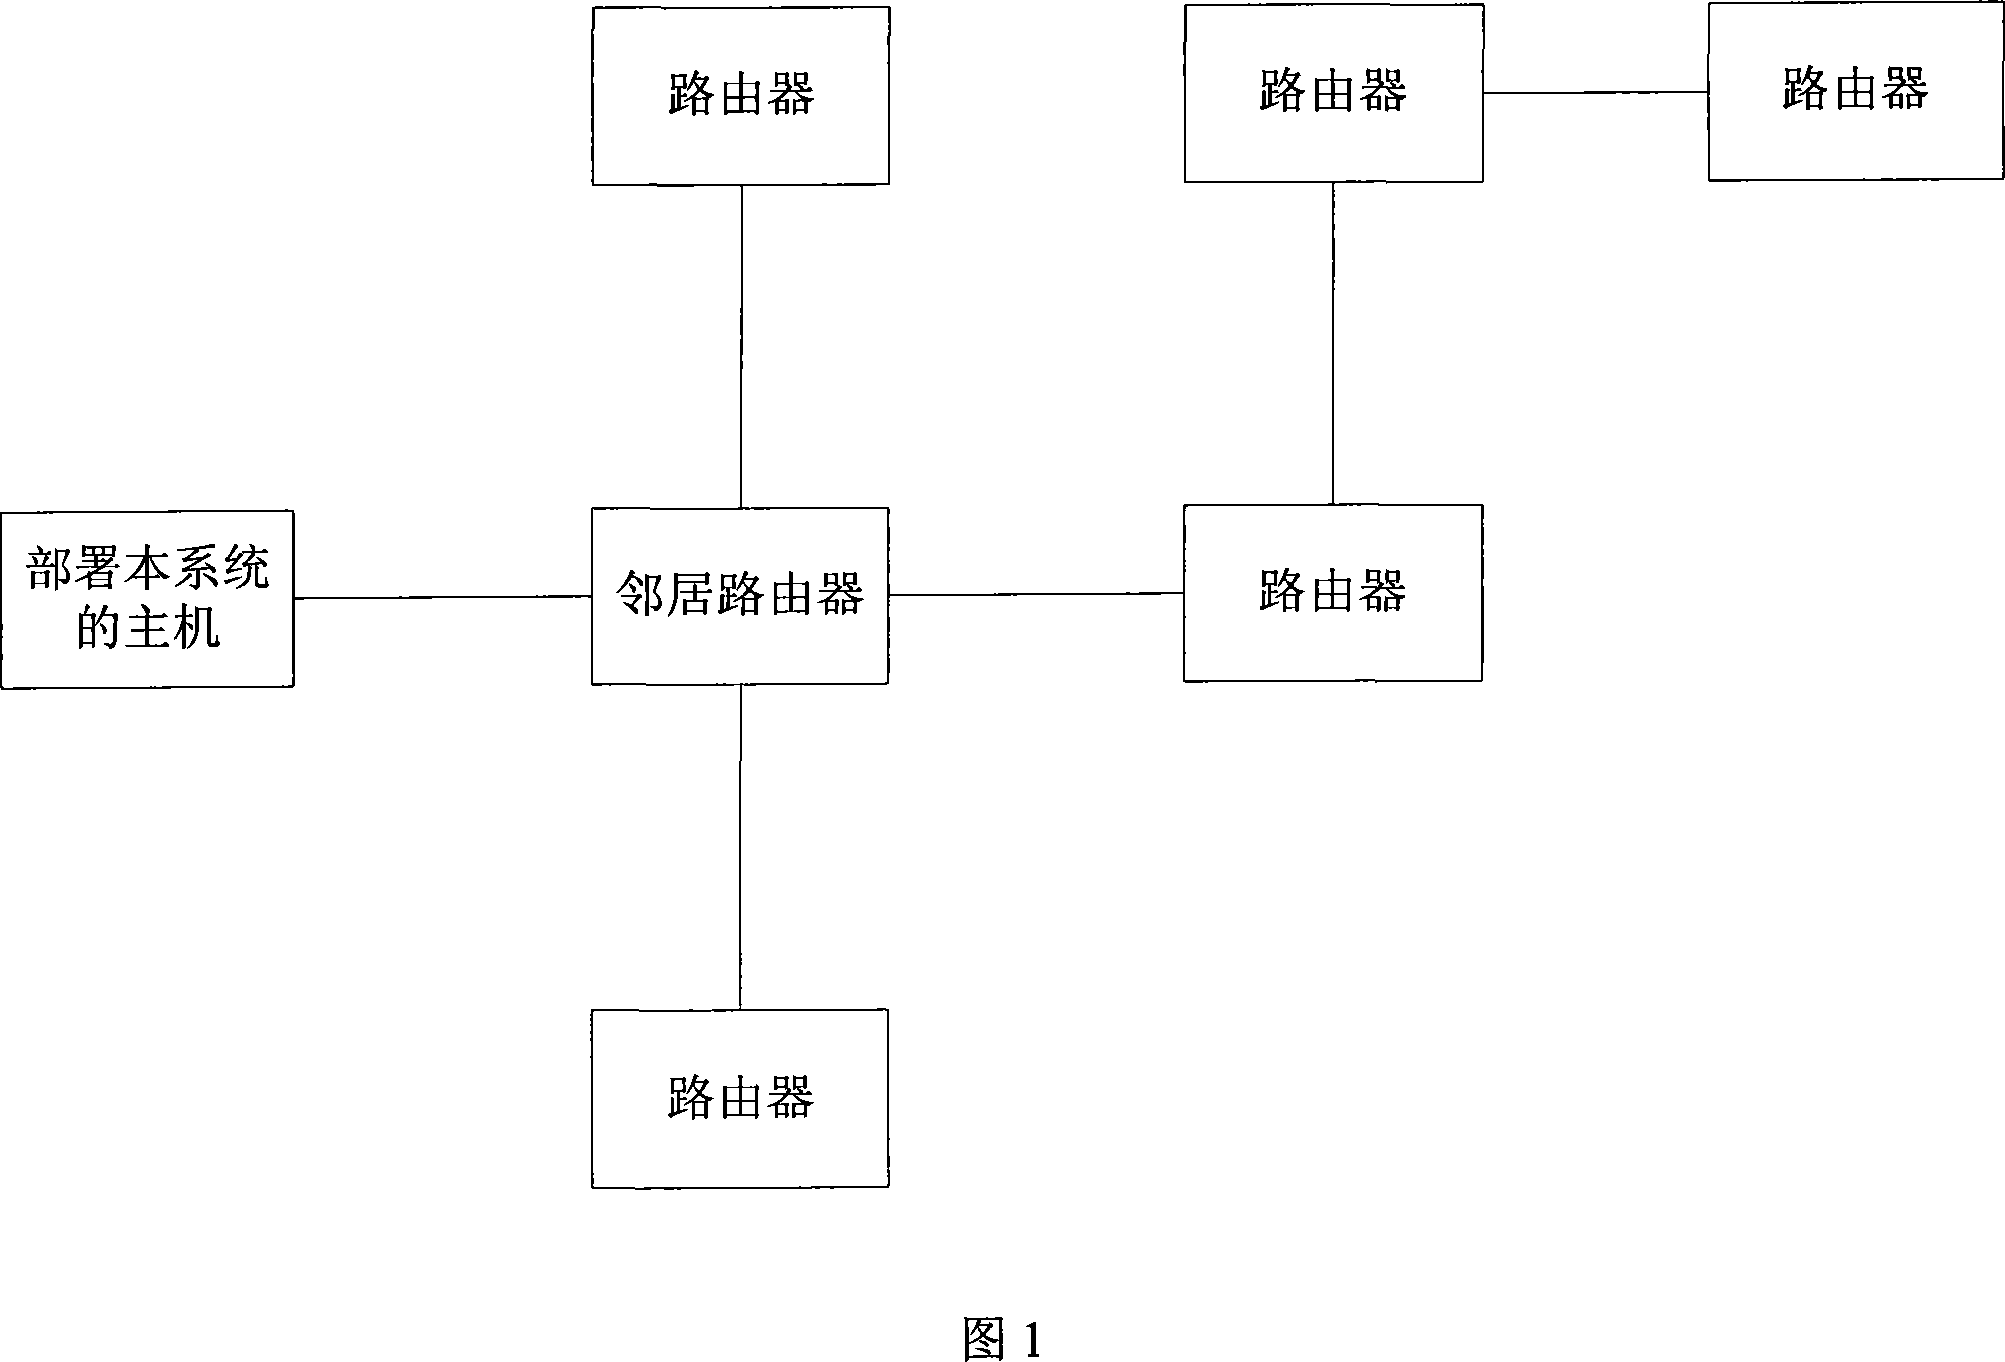 Method and device for IPv4 and IPv6 network failure detection and location